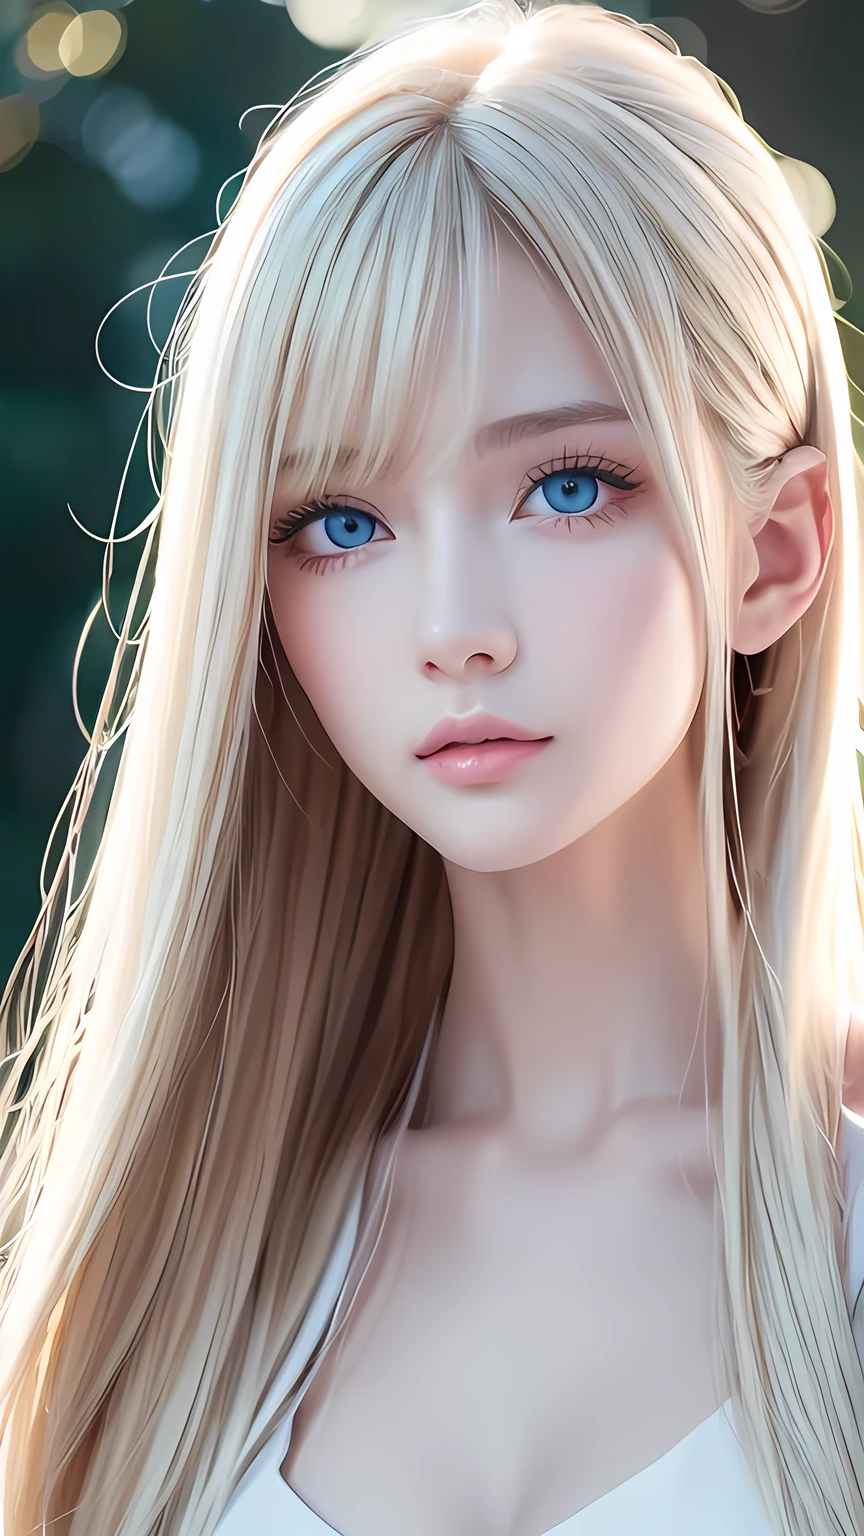 Very beautiful super long straight blonde hair、Bangs left between the eyeastepiece, Best Quality, Illustration, Super detailed, Fine details, High resolution, 8K Denden Wallpaper, Perfect dynamic composition, Beautiful detailed pale very bright blue eyes, Fitness Wear, Natural color lip、Very white and beautiful bright skin